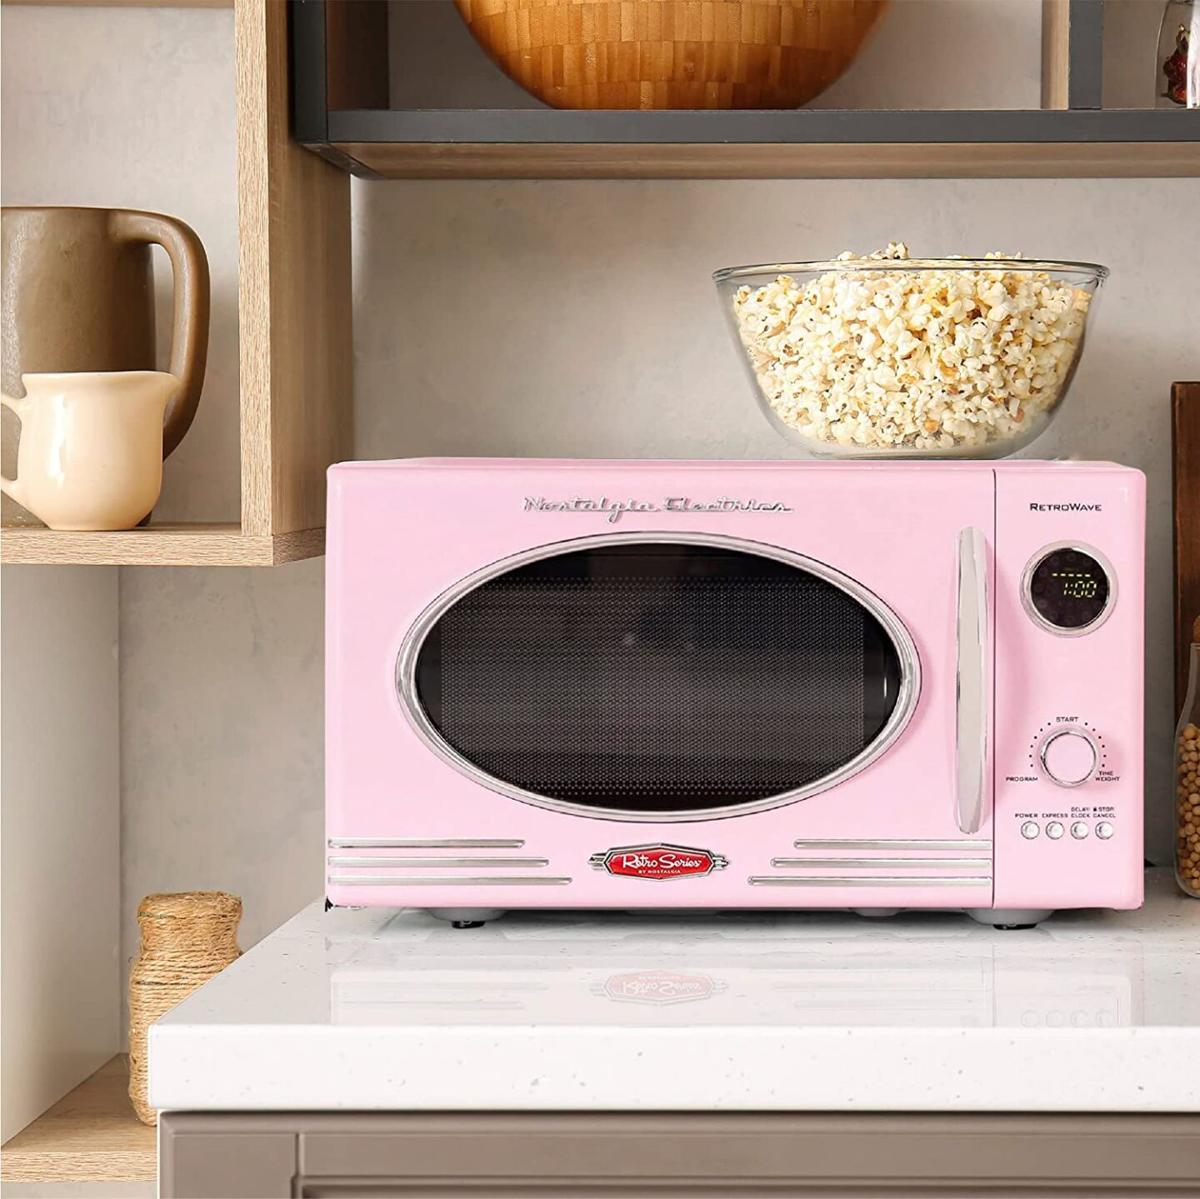 Get the Retro Kitchen Appliance Look for Less